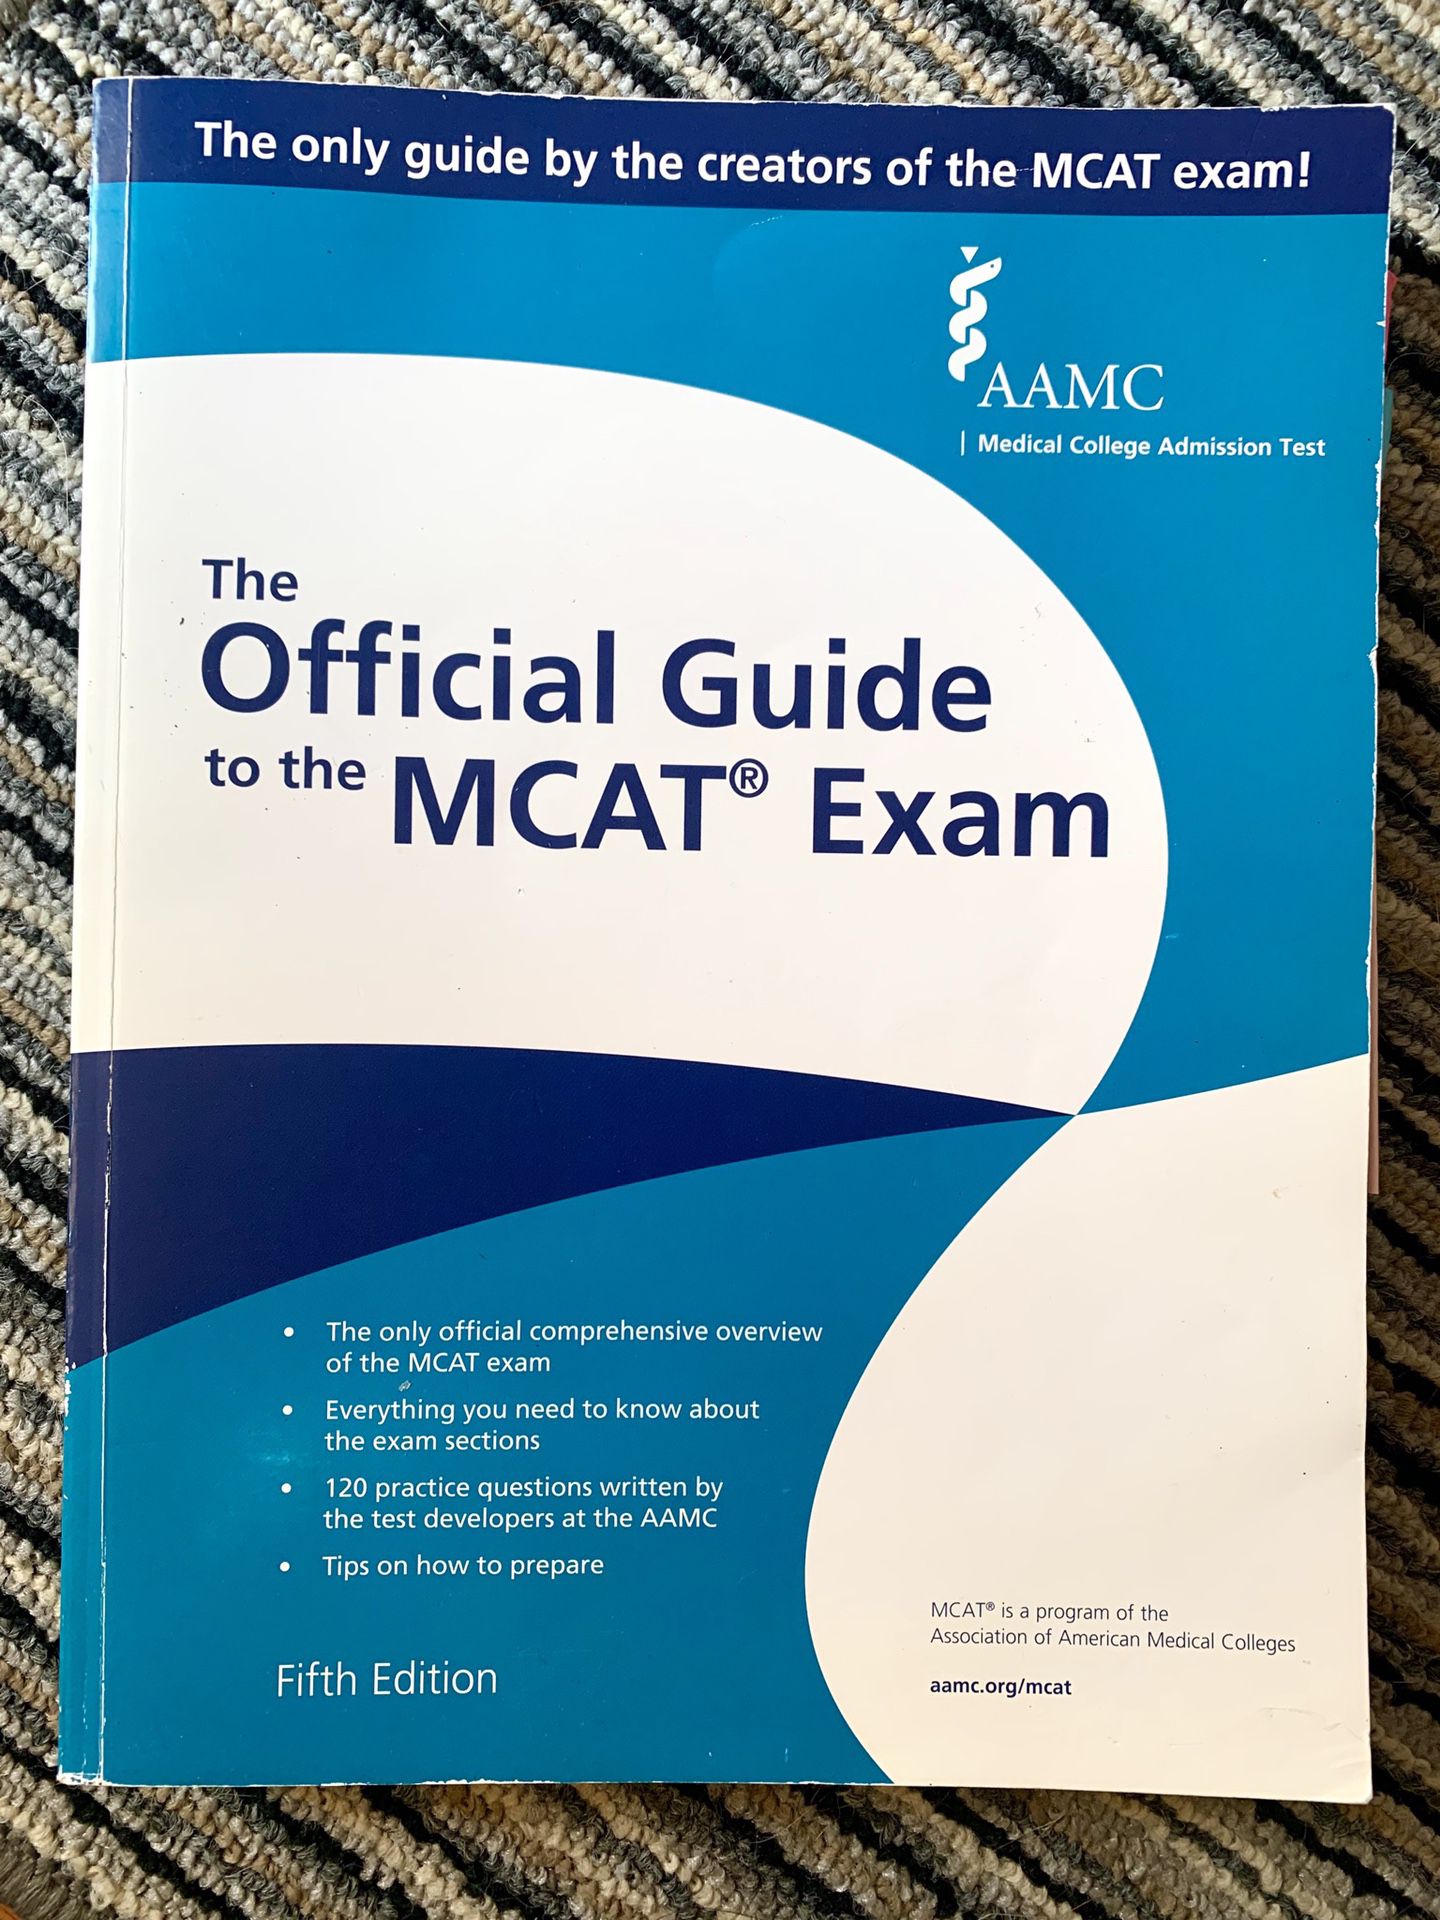 MCAT – The Official Guide to the MCAT Exam, Fifth Edition